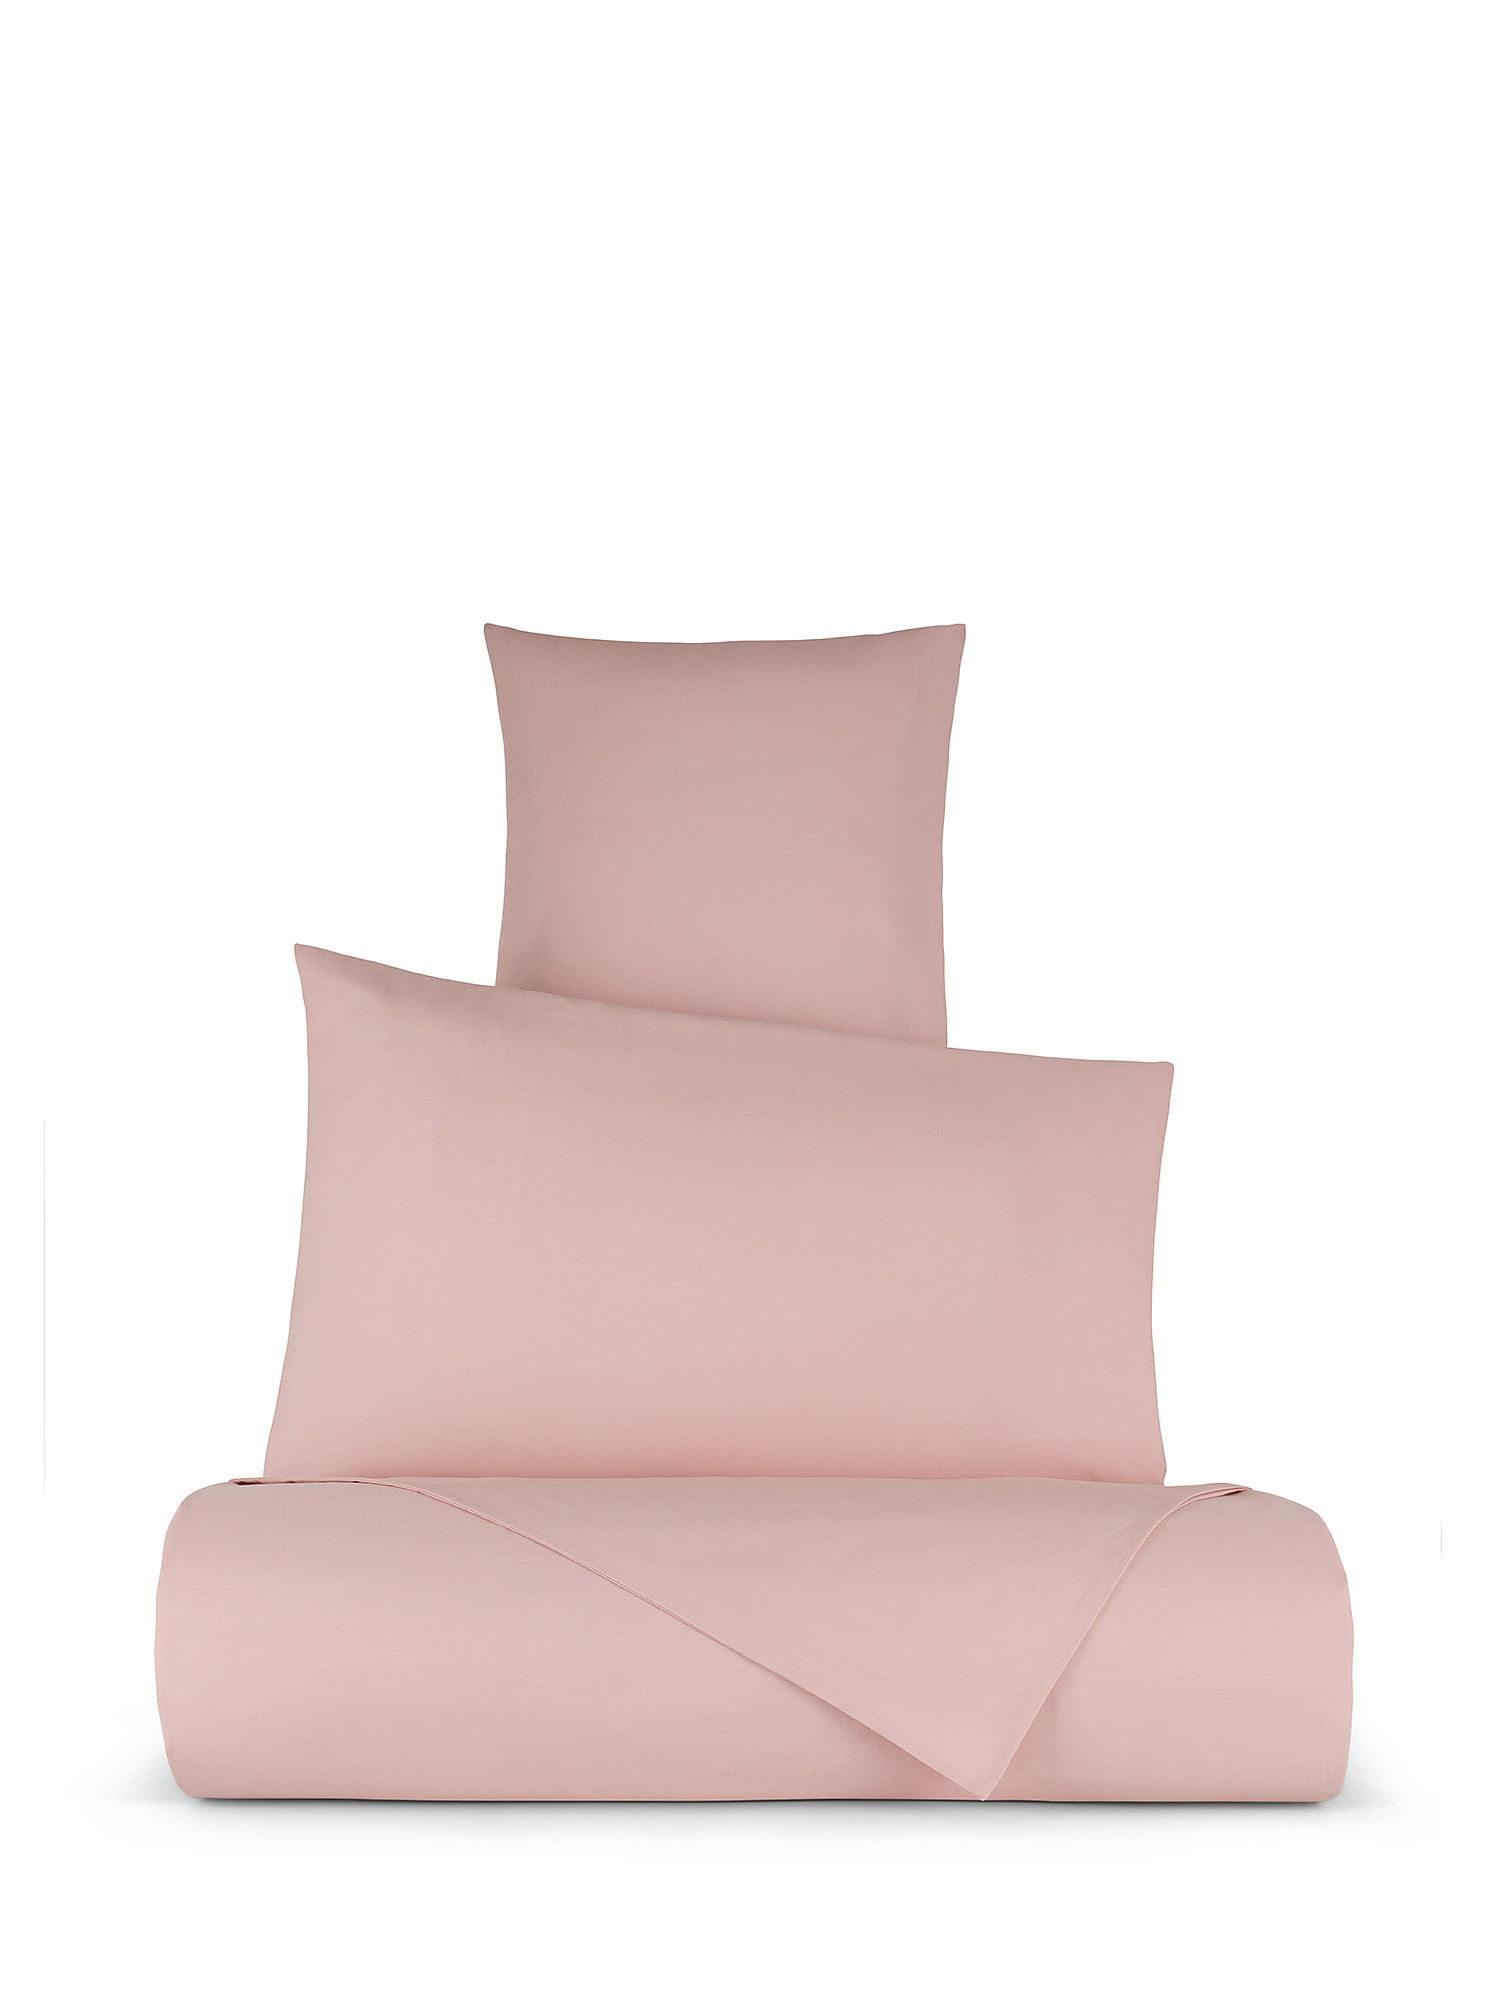 Solid color percale cotton sheet set, Pink, large image number 0